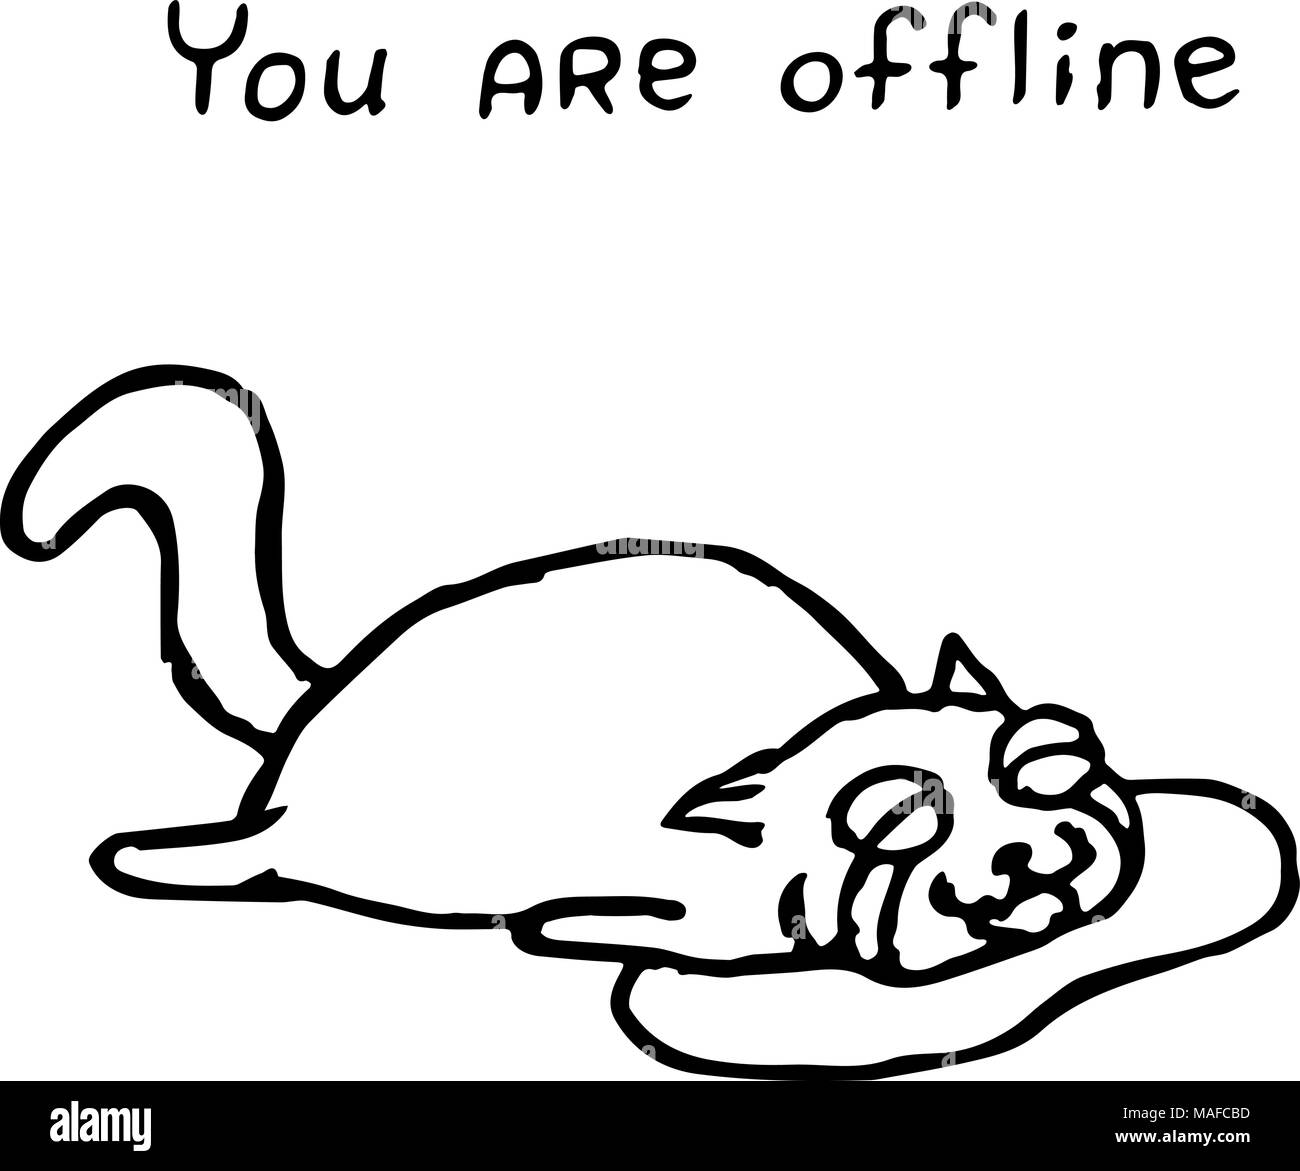 The upset cat Tik lies in tears. You are offline. Vector illustration. Cute pet character. Play with me. Stock Vector